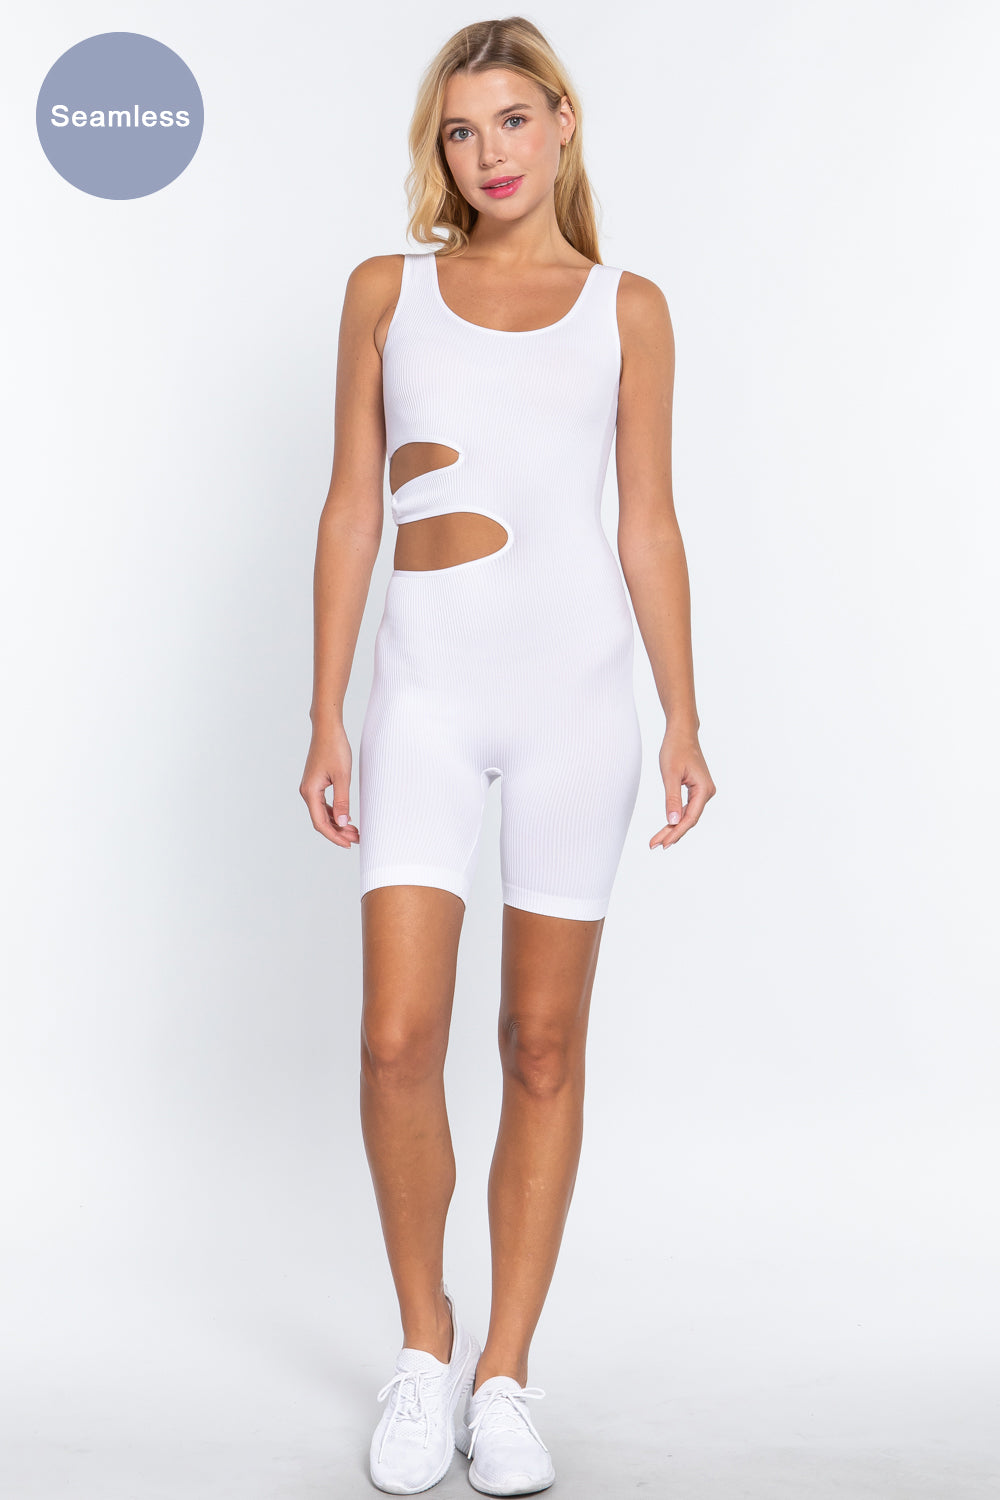 Suave Cut-out Seamless Romper Girl Code 